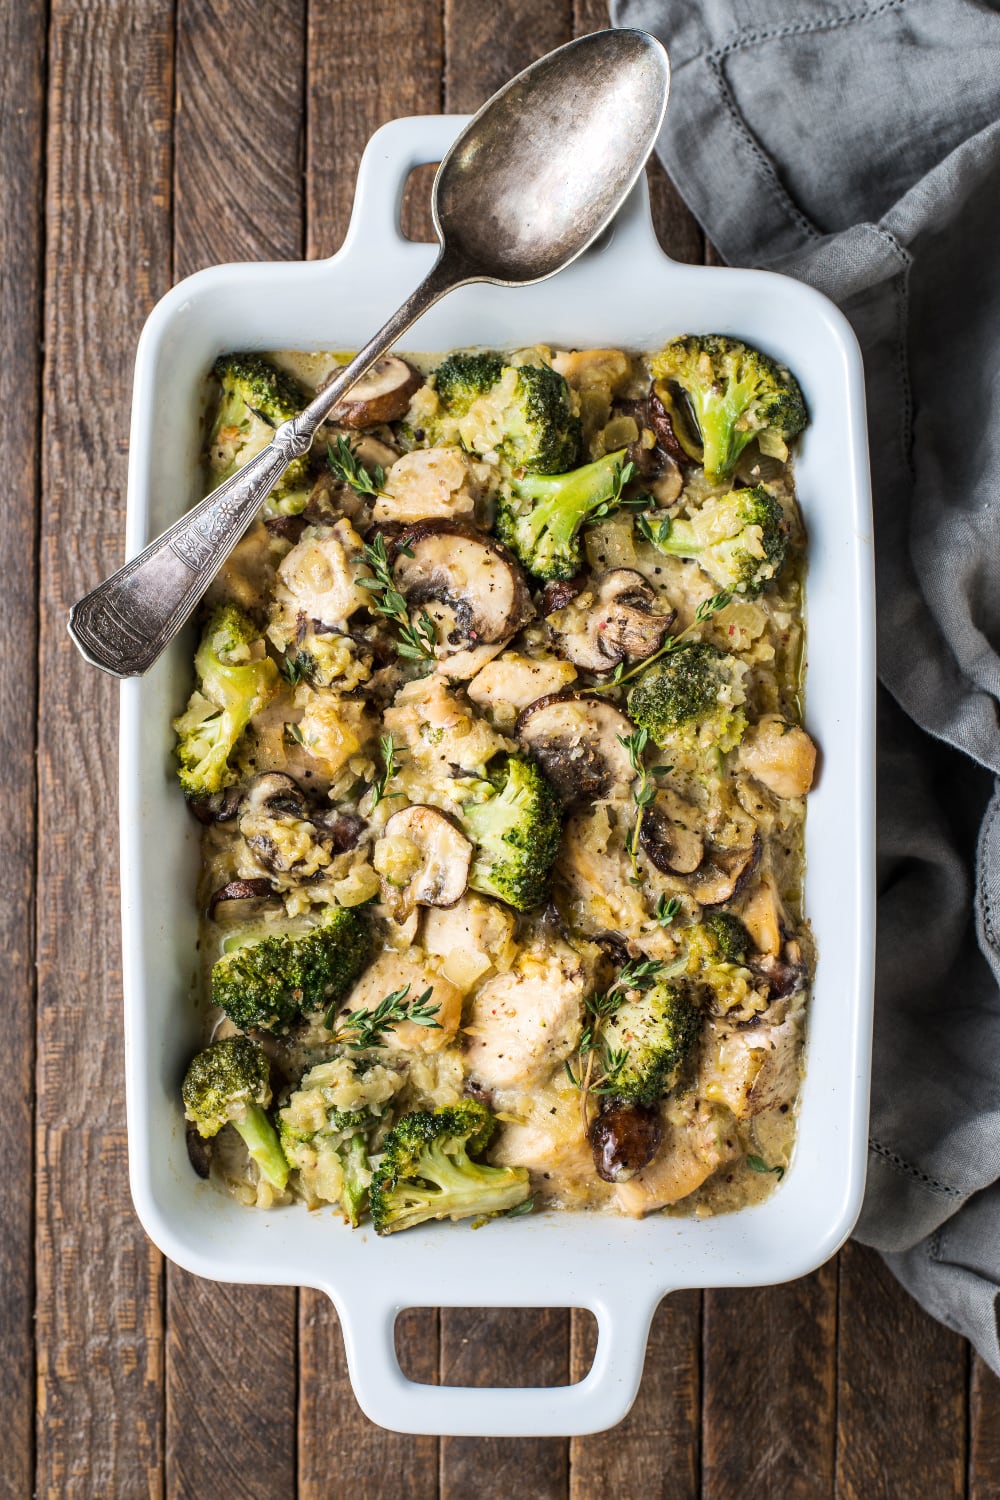 Cooked healthy chicken broccoli casserole with large spoon